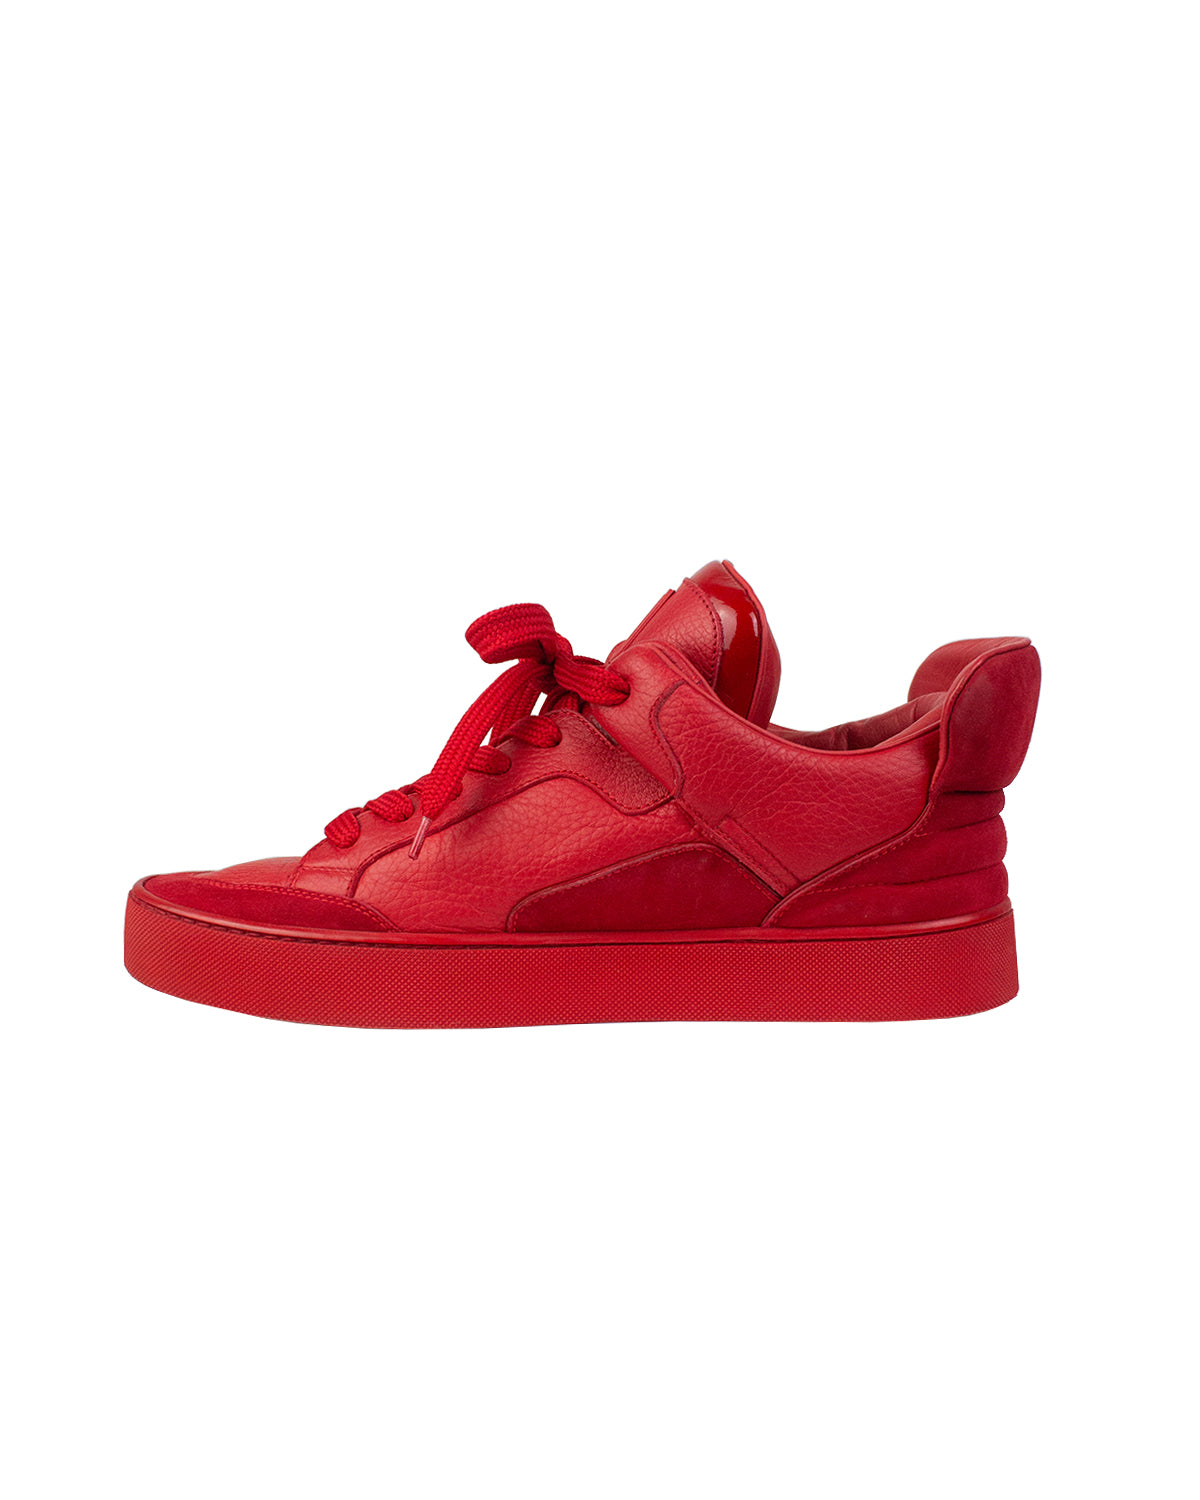 Kanye West x Louis Vuitton - Red on Red 